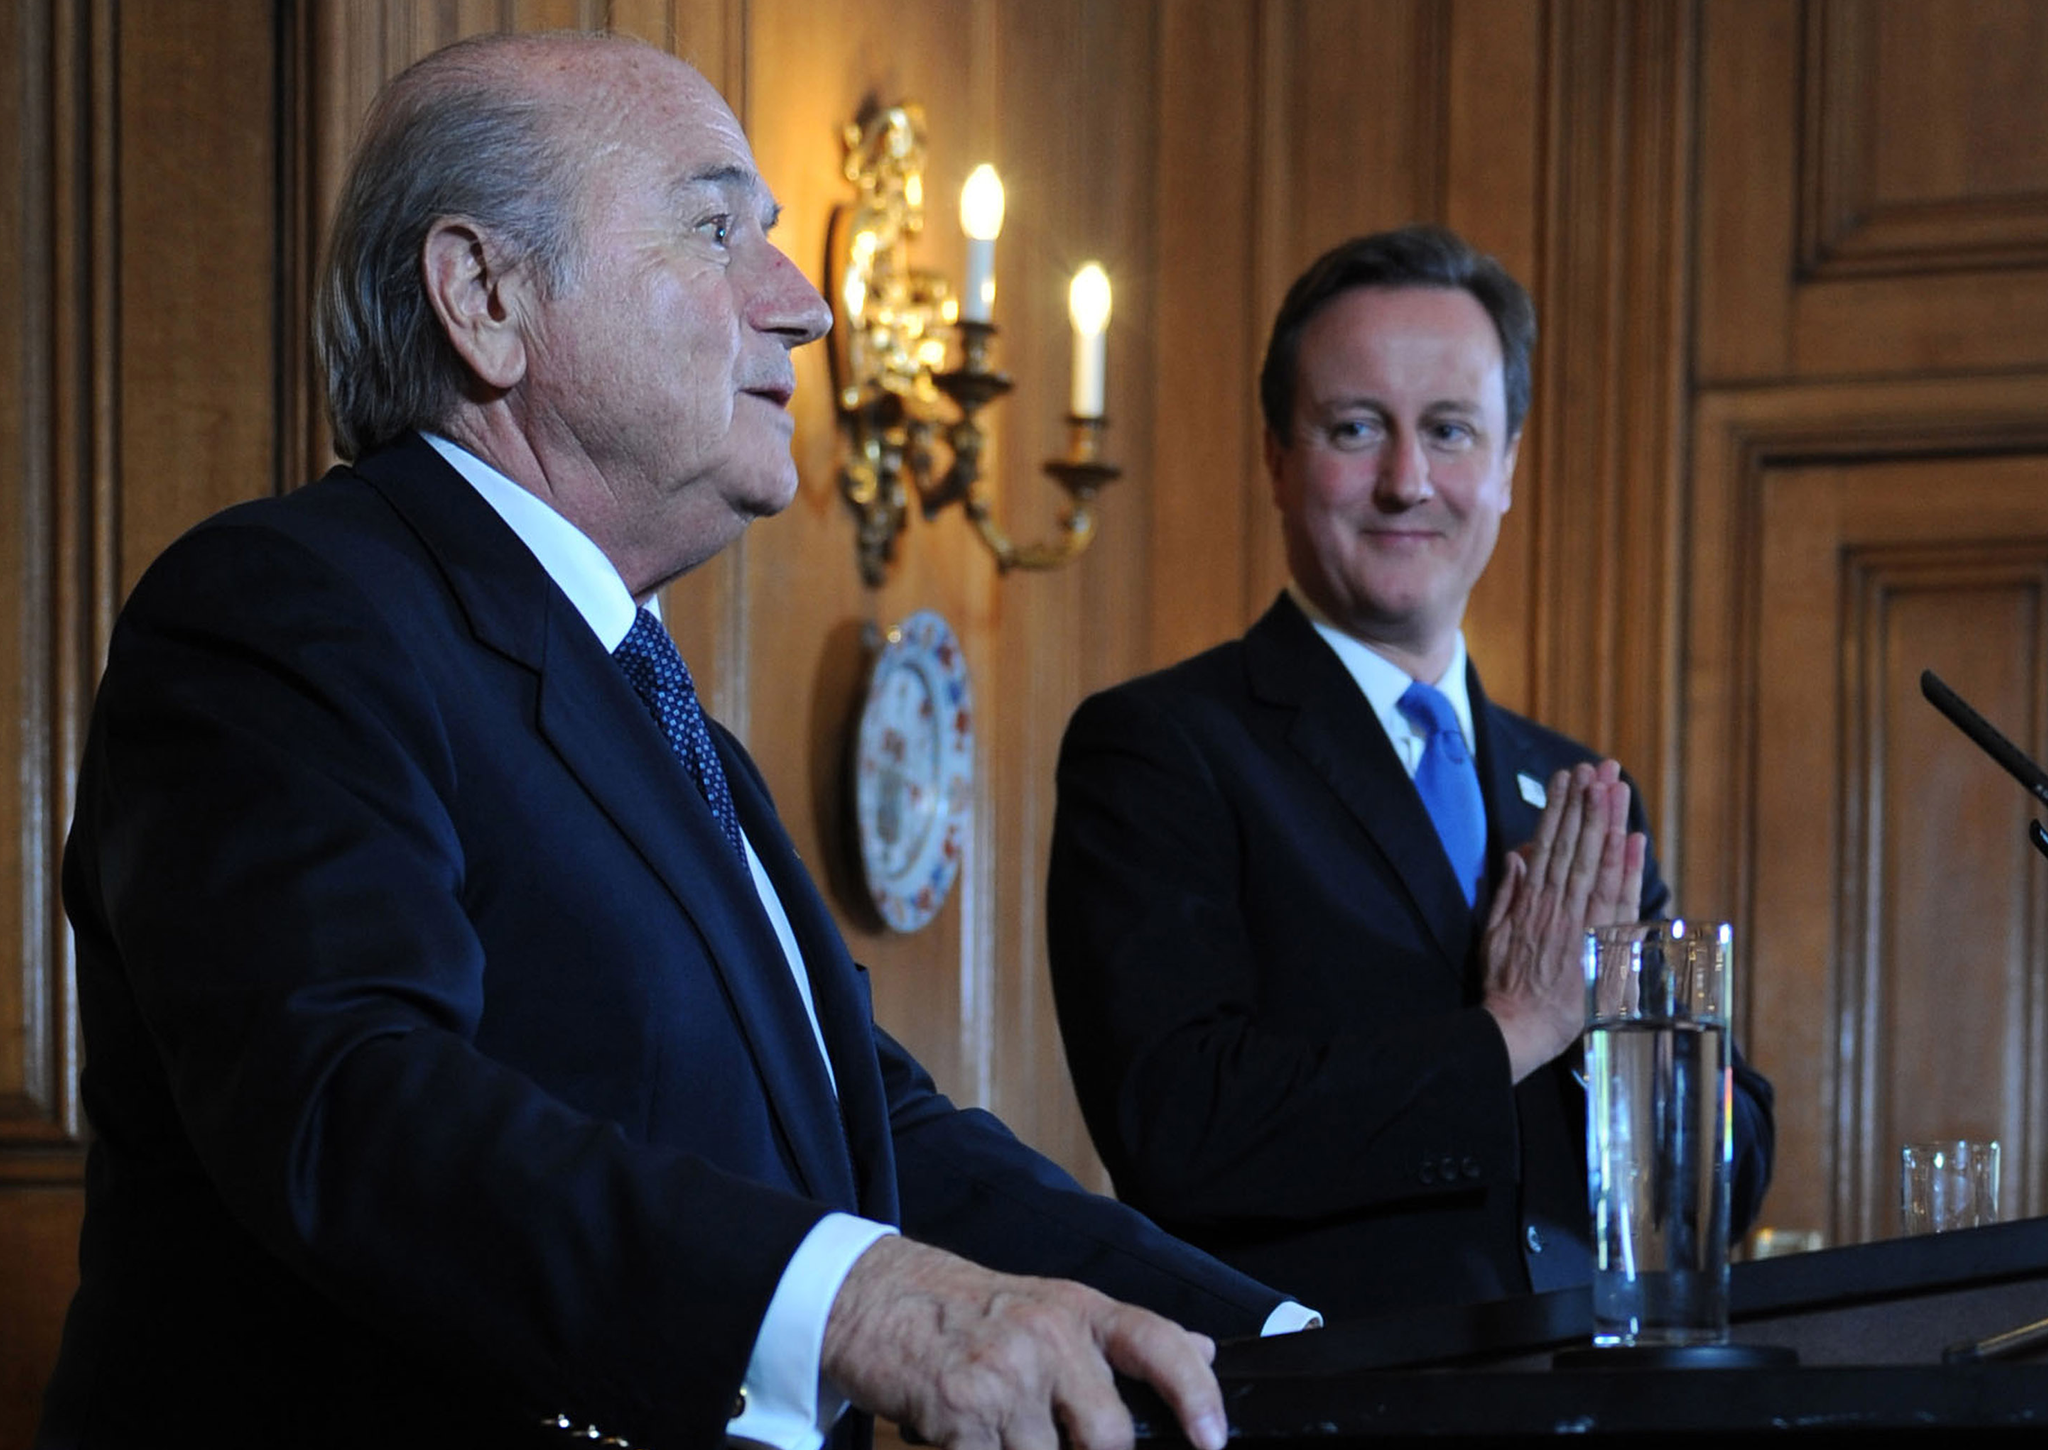 David Cameron looks on as Sepp Blatter speaks to the media at number 10 Downing Street on October 13, 2010